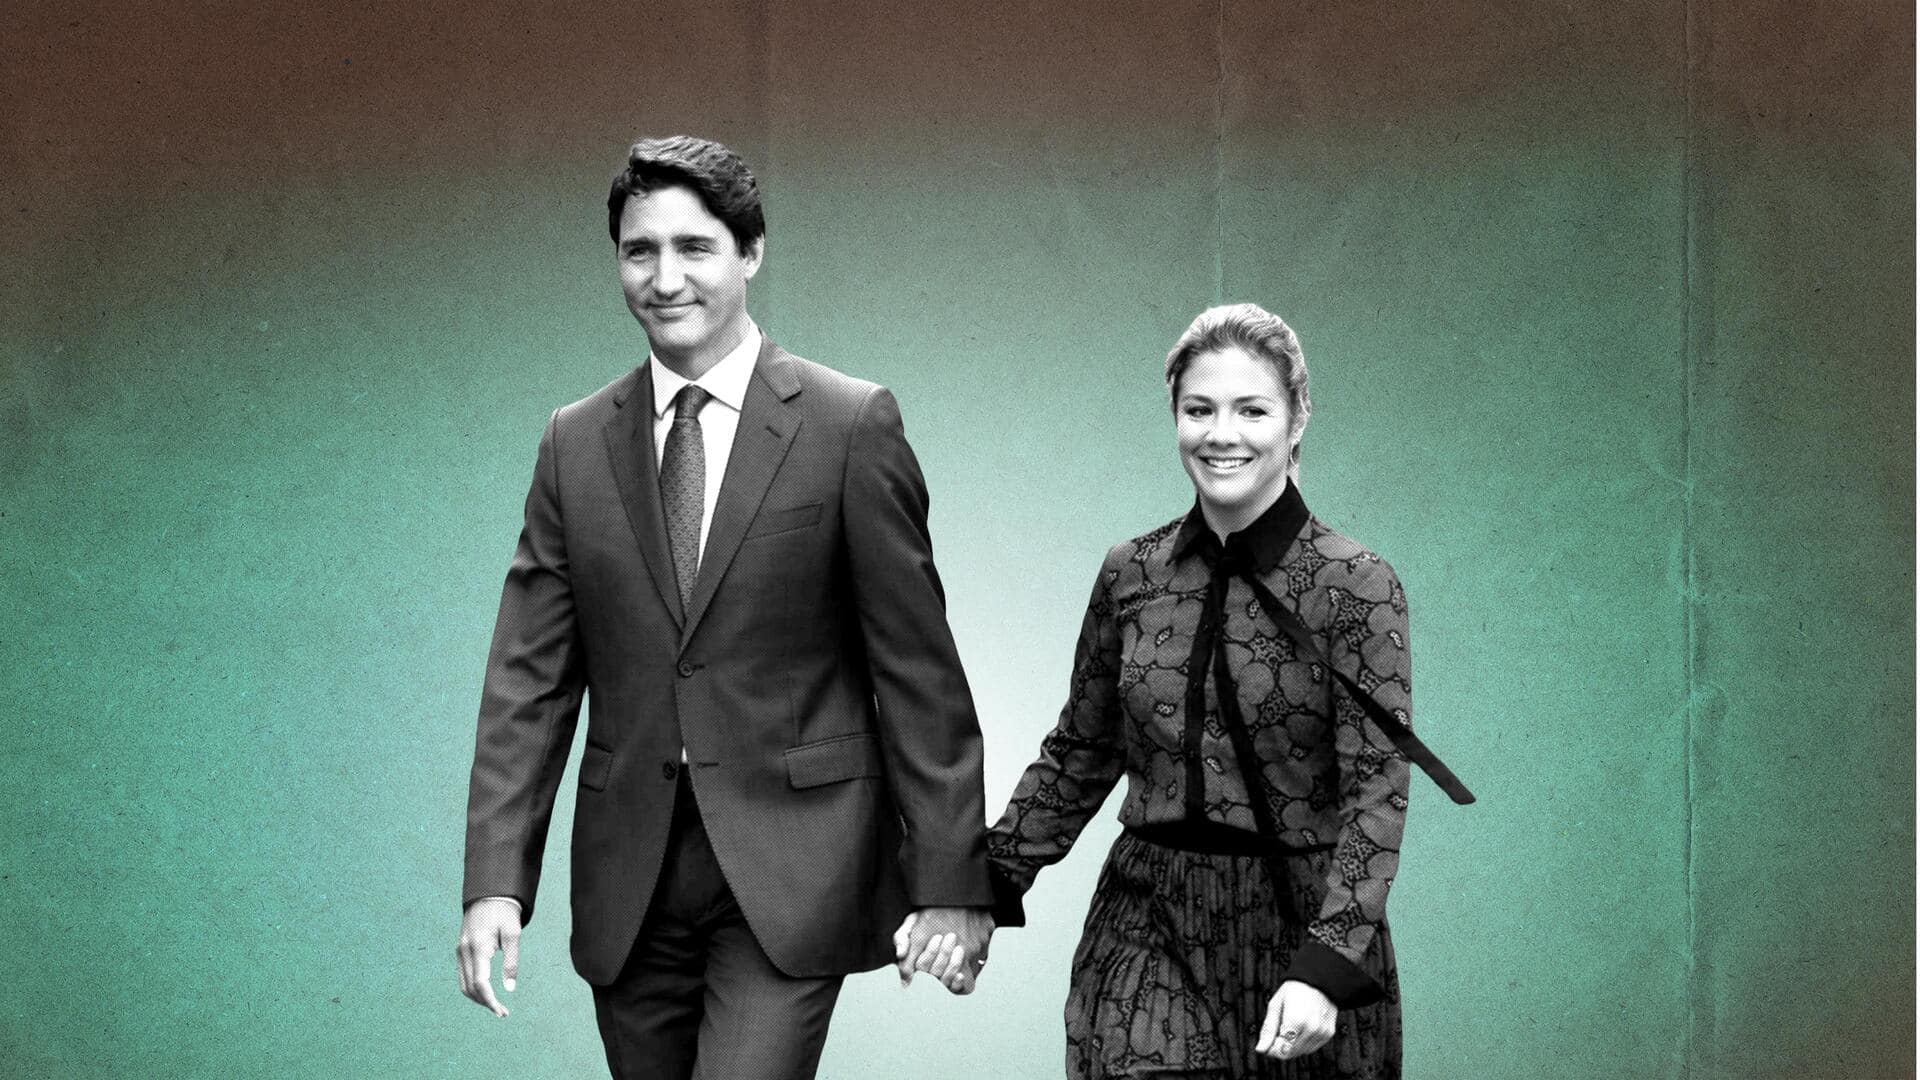 Throwback: Times Justin Trudeau and Sophie Grégoire Trudeau made headlines